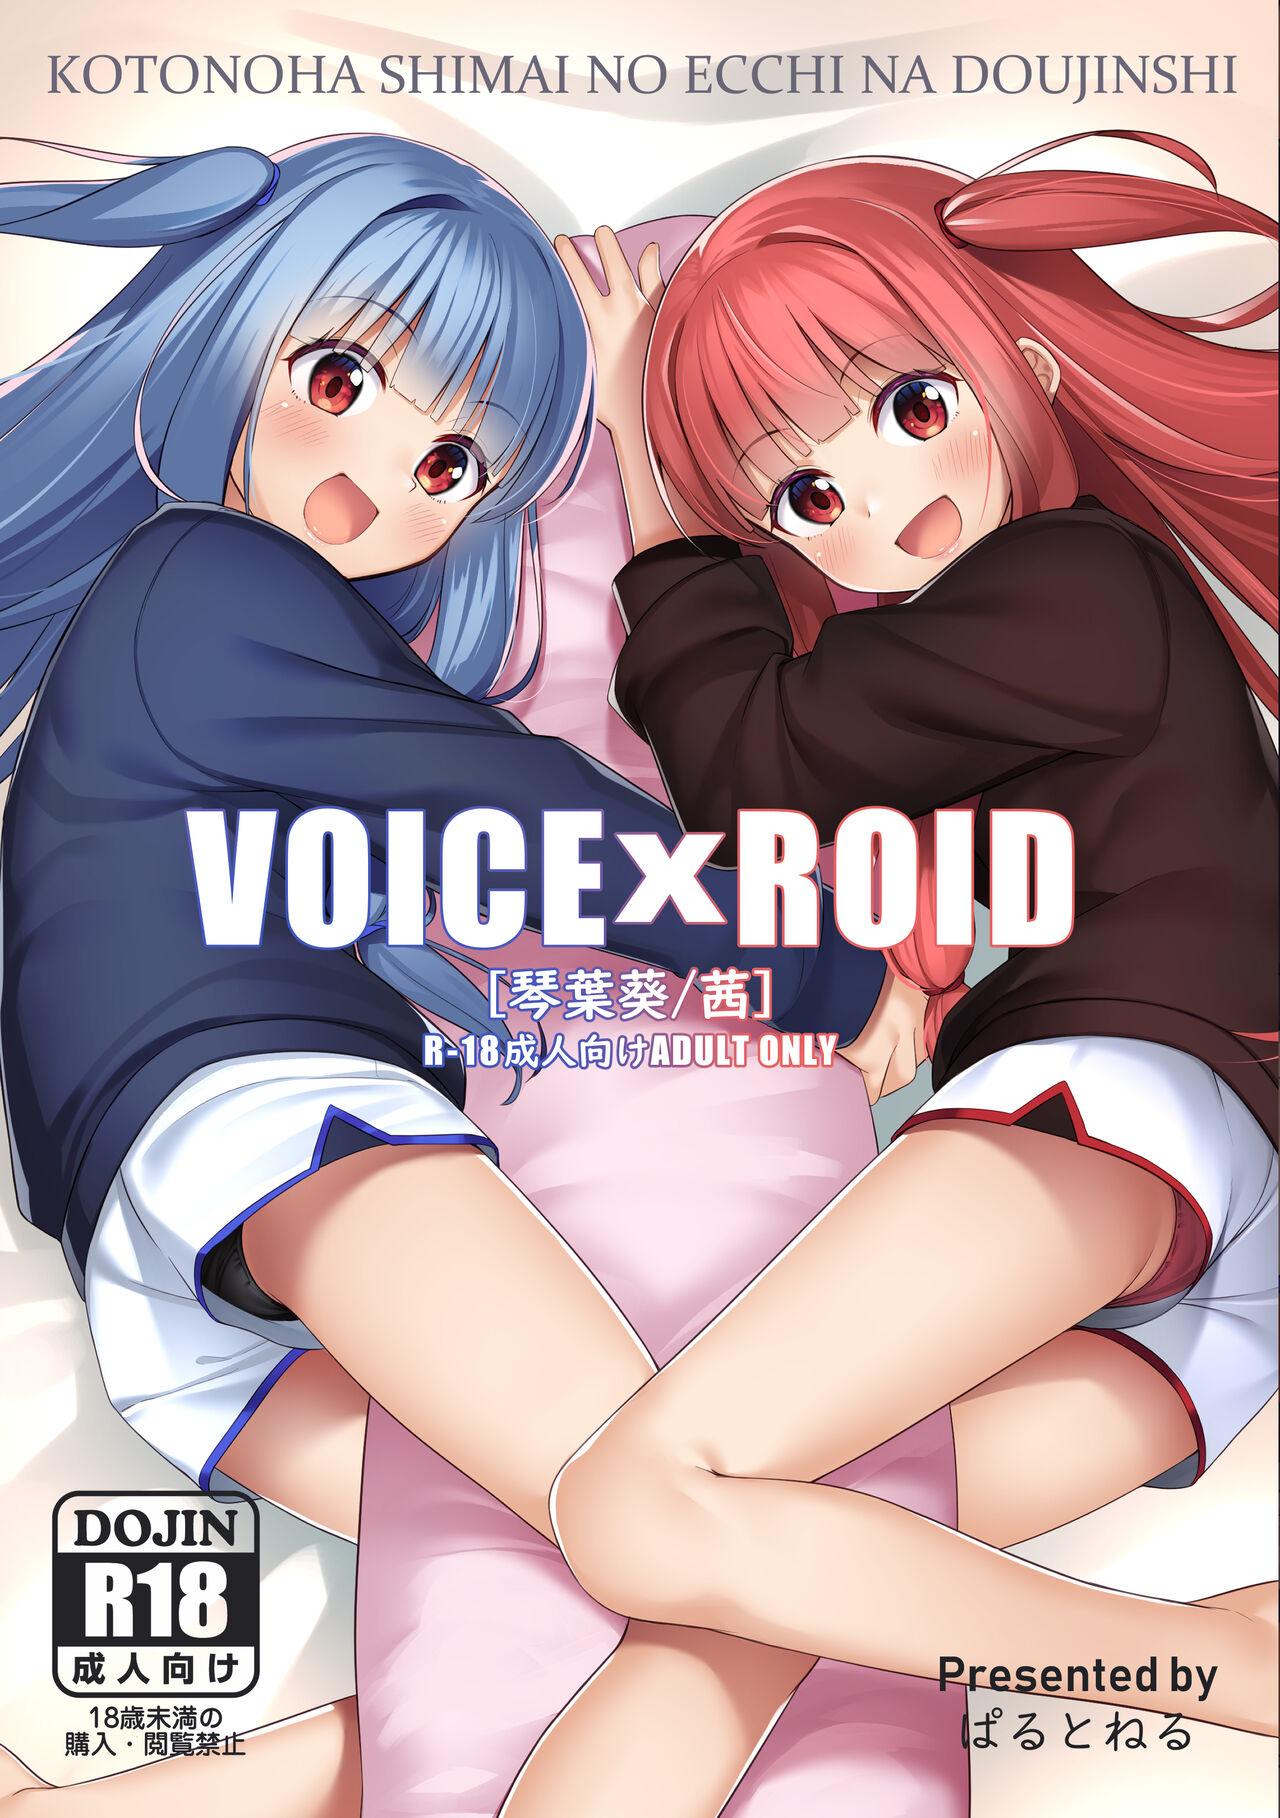 Sex VOICE x ROID - Voiceroid Gay Domination - Page 1